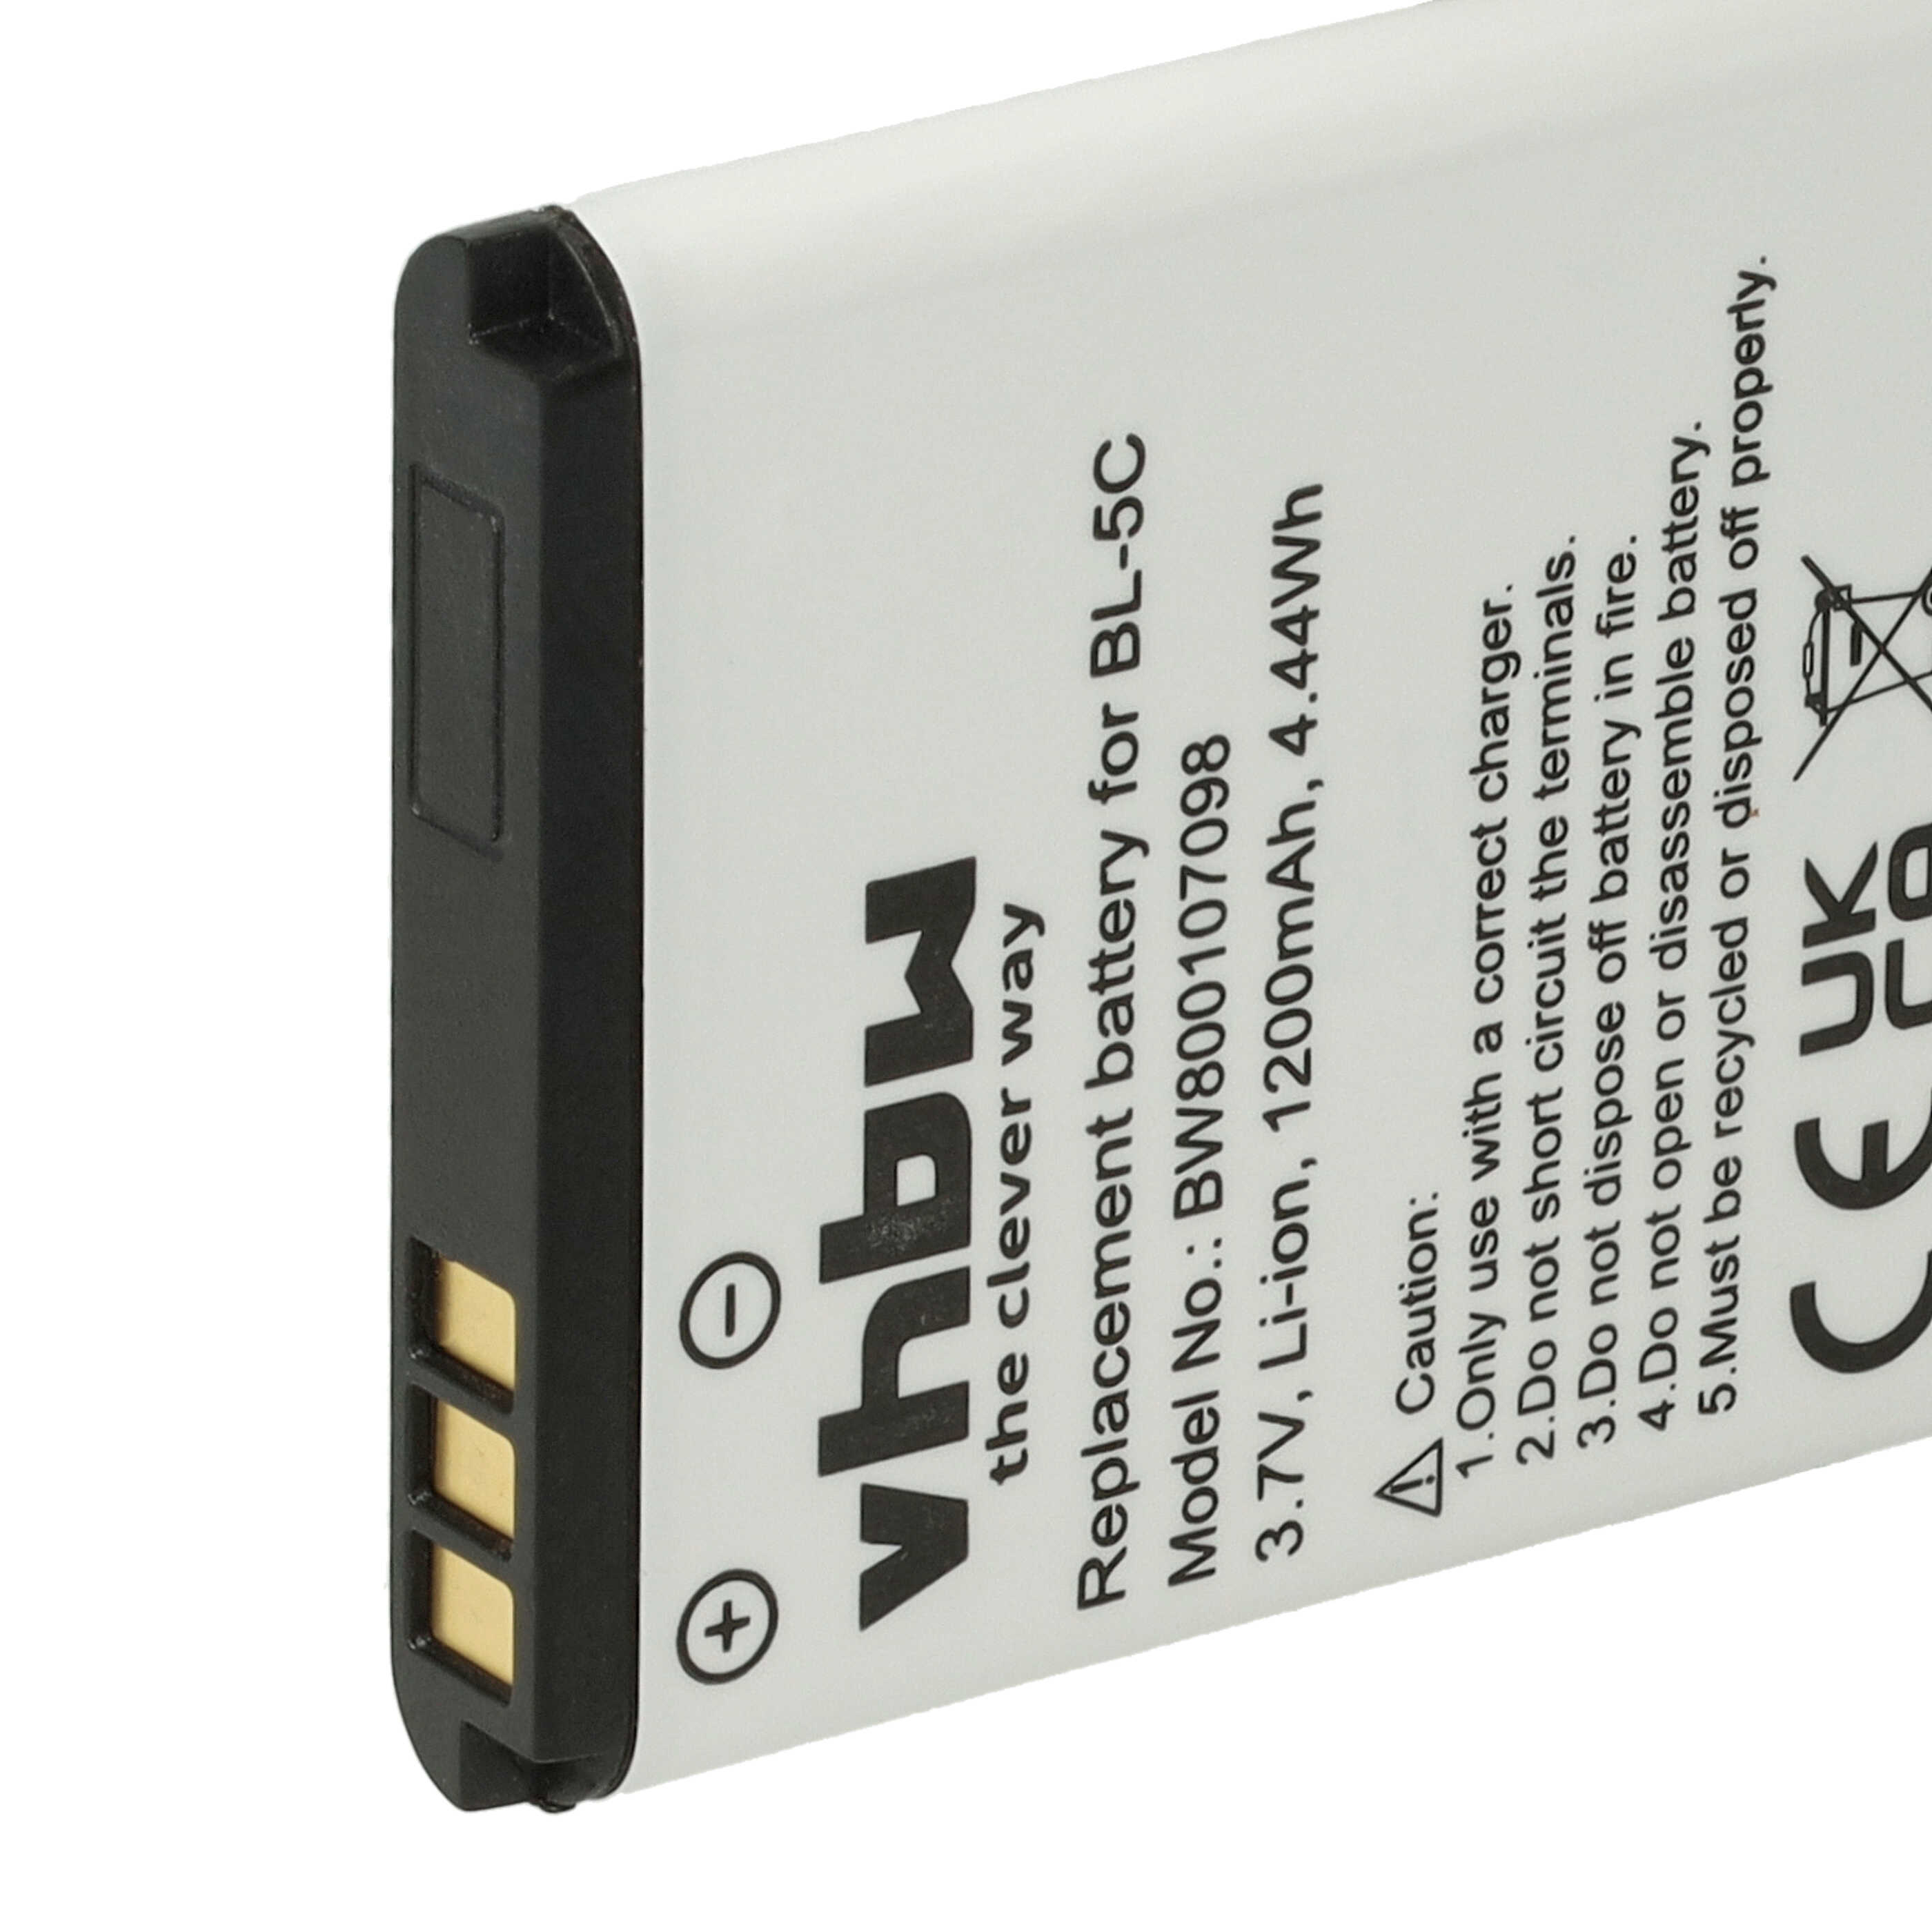 Mobile Phone Battery Replacement for Alcatel 3BN67332AA, 10000058, RTR001F01 - 1200mAh 3.7V Li-Ion